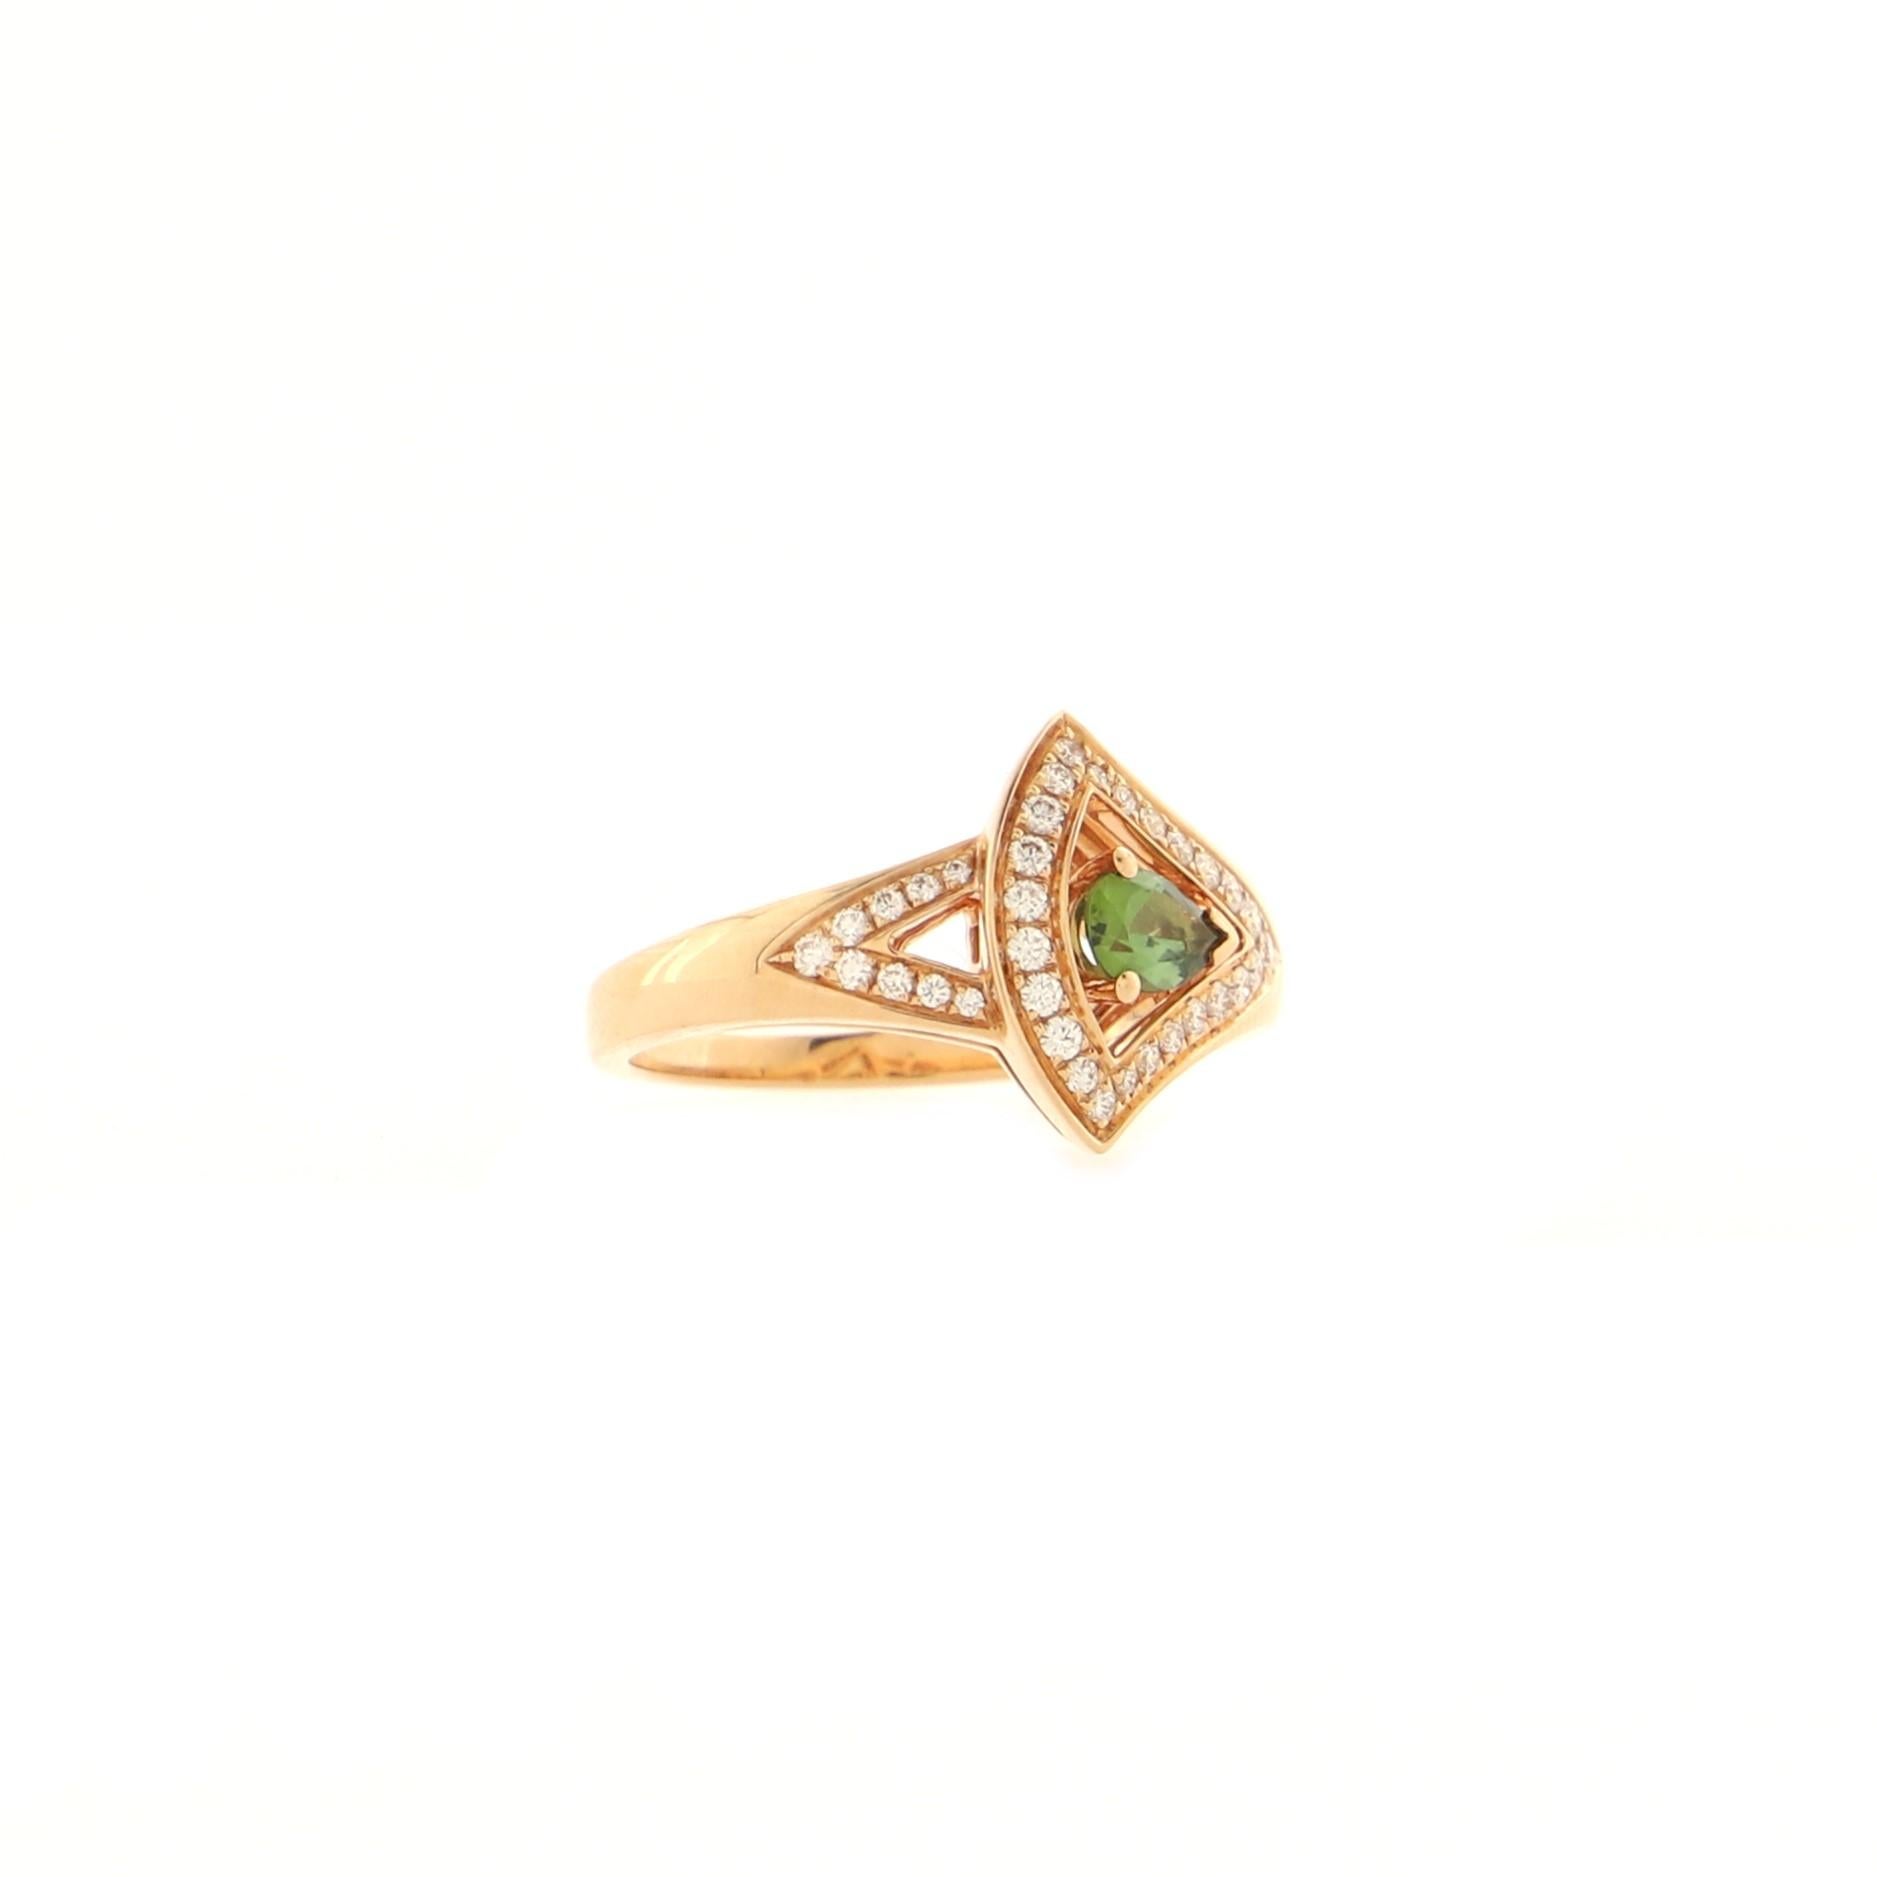 Condition: Great. Minor wear throughout.
Accessories: No Accessories
Measurements: Size: 7.75, Width: 2.05 mm
Designer: Bvlgari
Model: Diva's Dream Openwork Ring 18K Rose Gold with Diamonds and Green Tourmaline
Exterior Color: Yellow Gold
Item